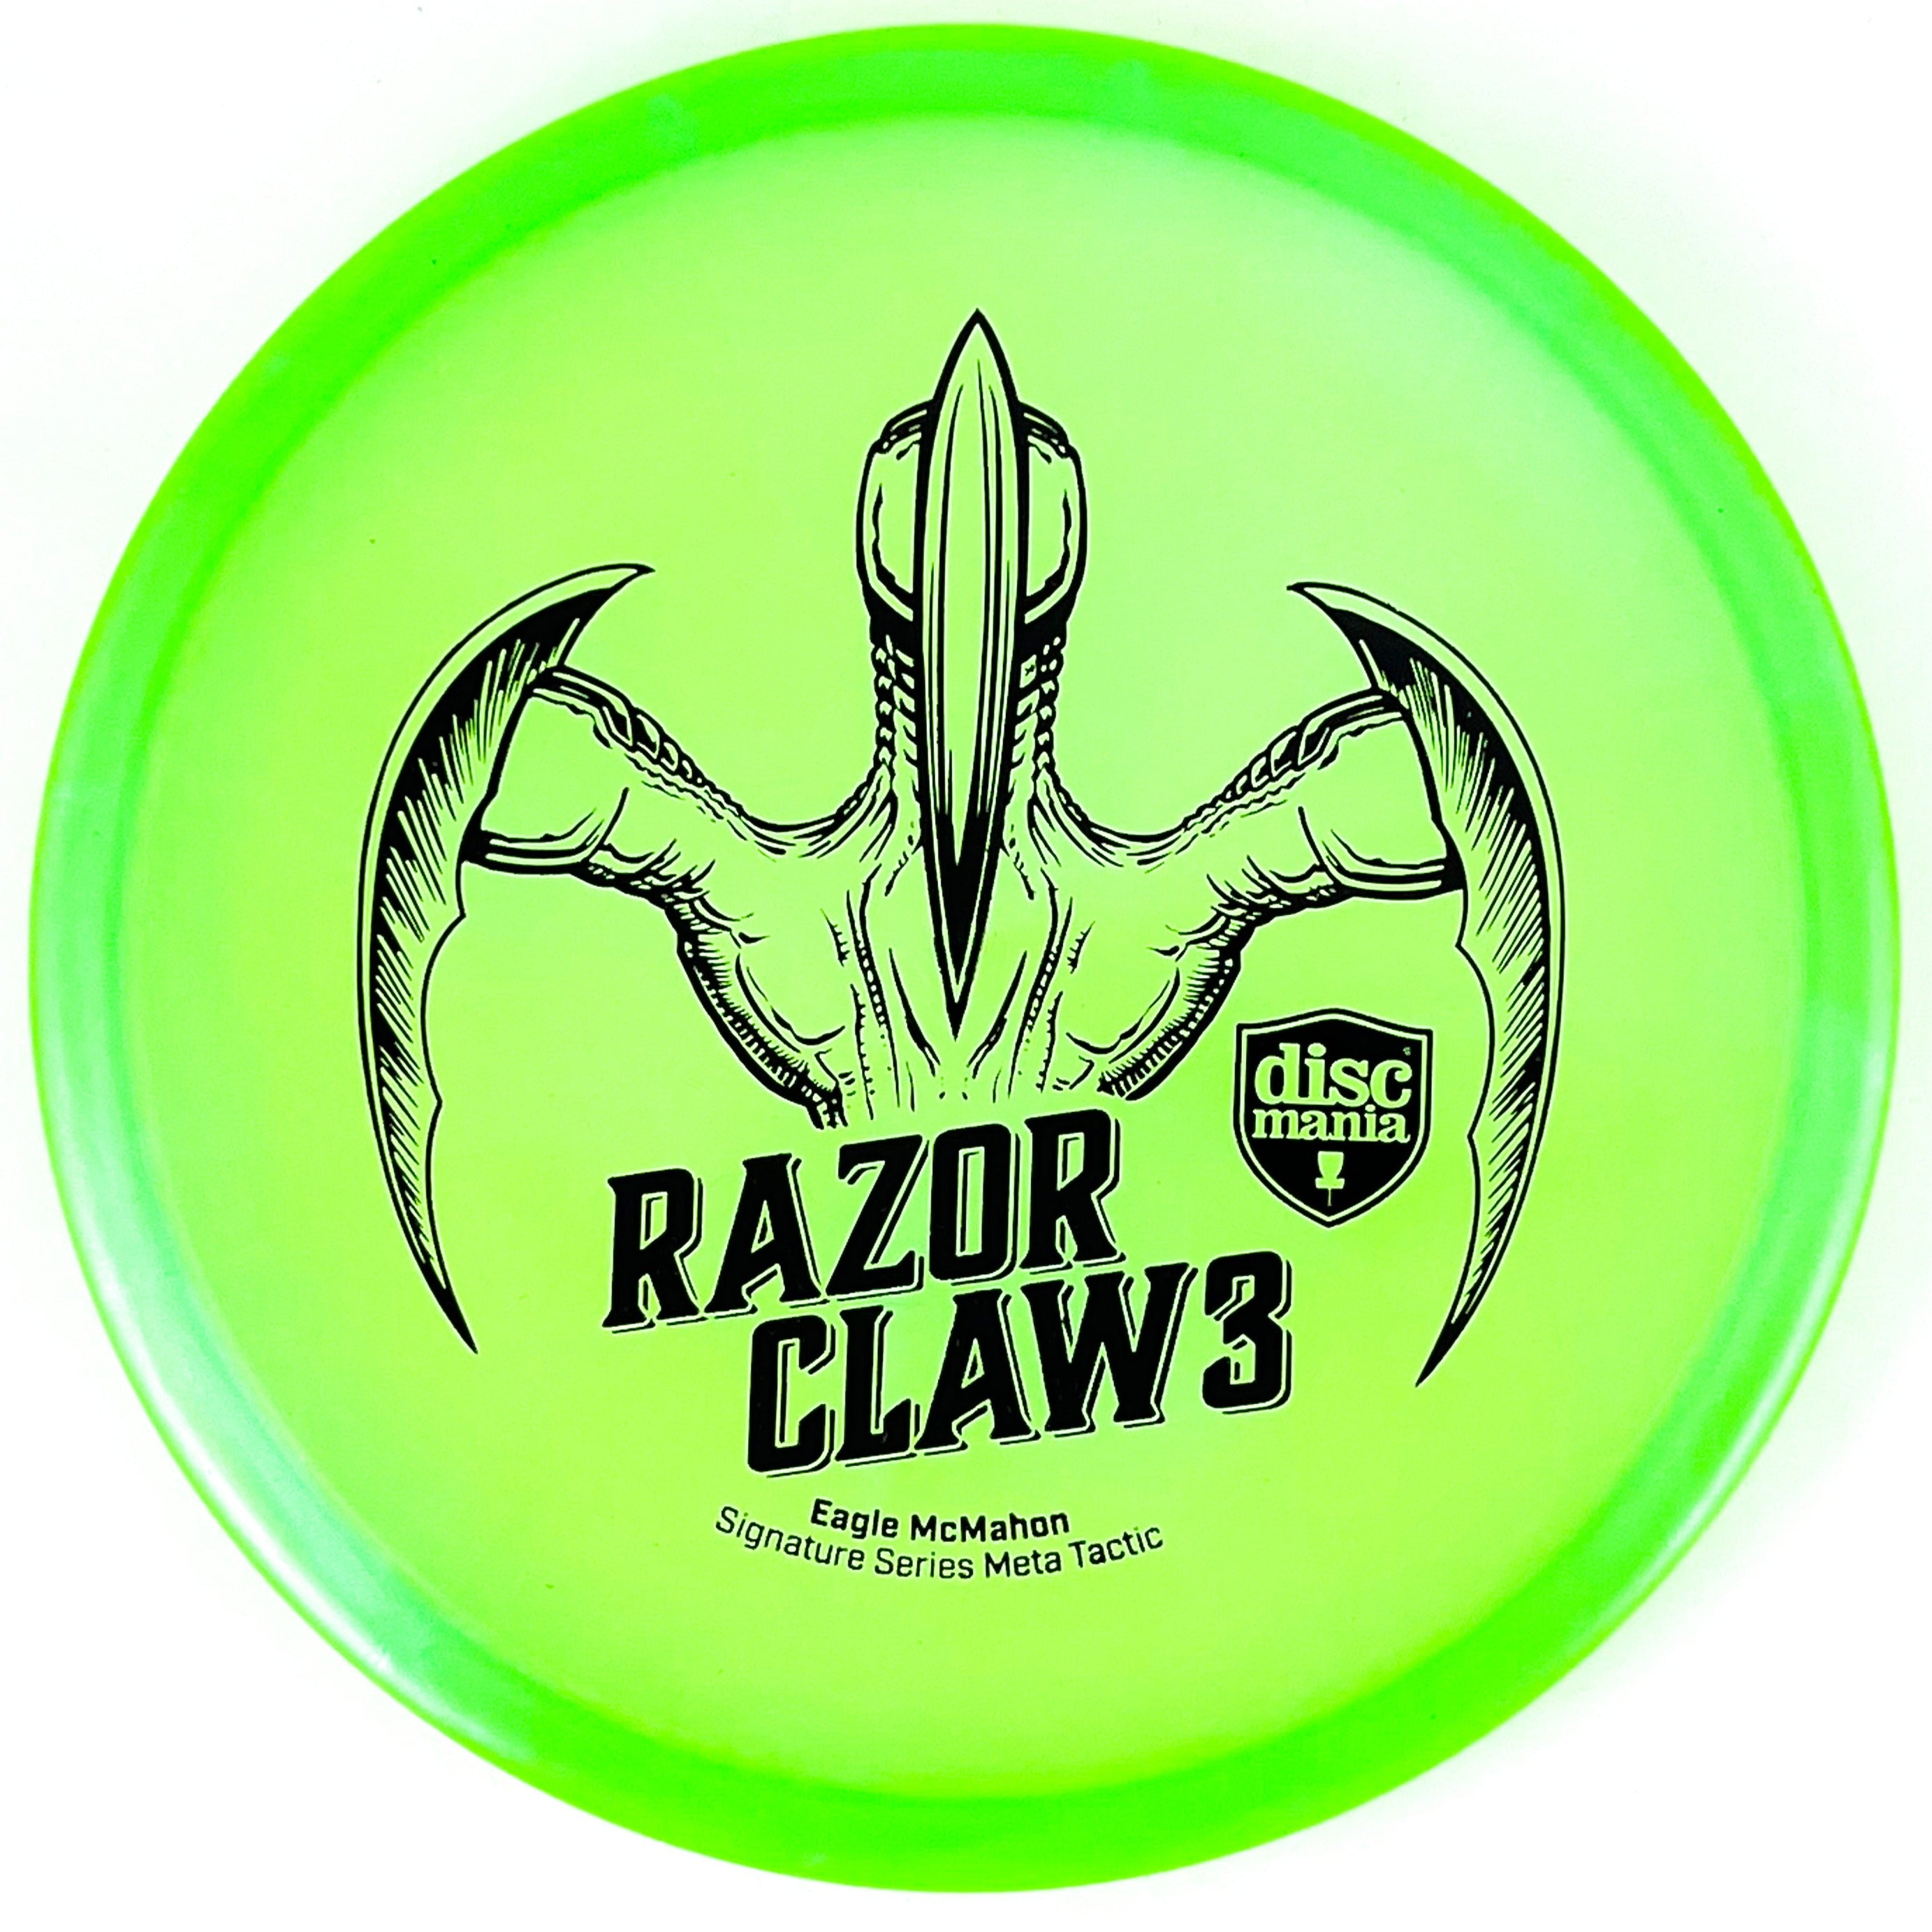 Green Eagle McMahon Signature Series Razor Claw 3 disc golf putt and approach disc by Discmania Golf Discs.